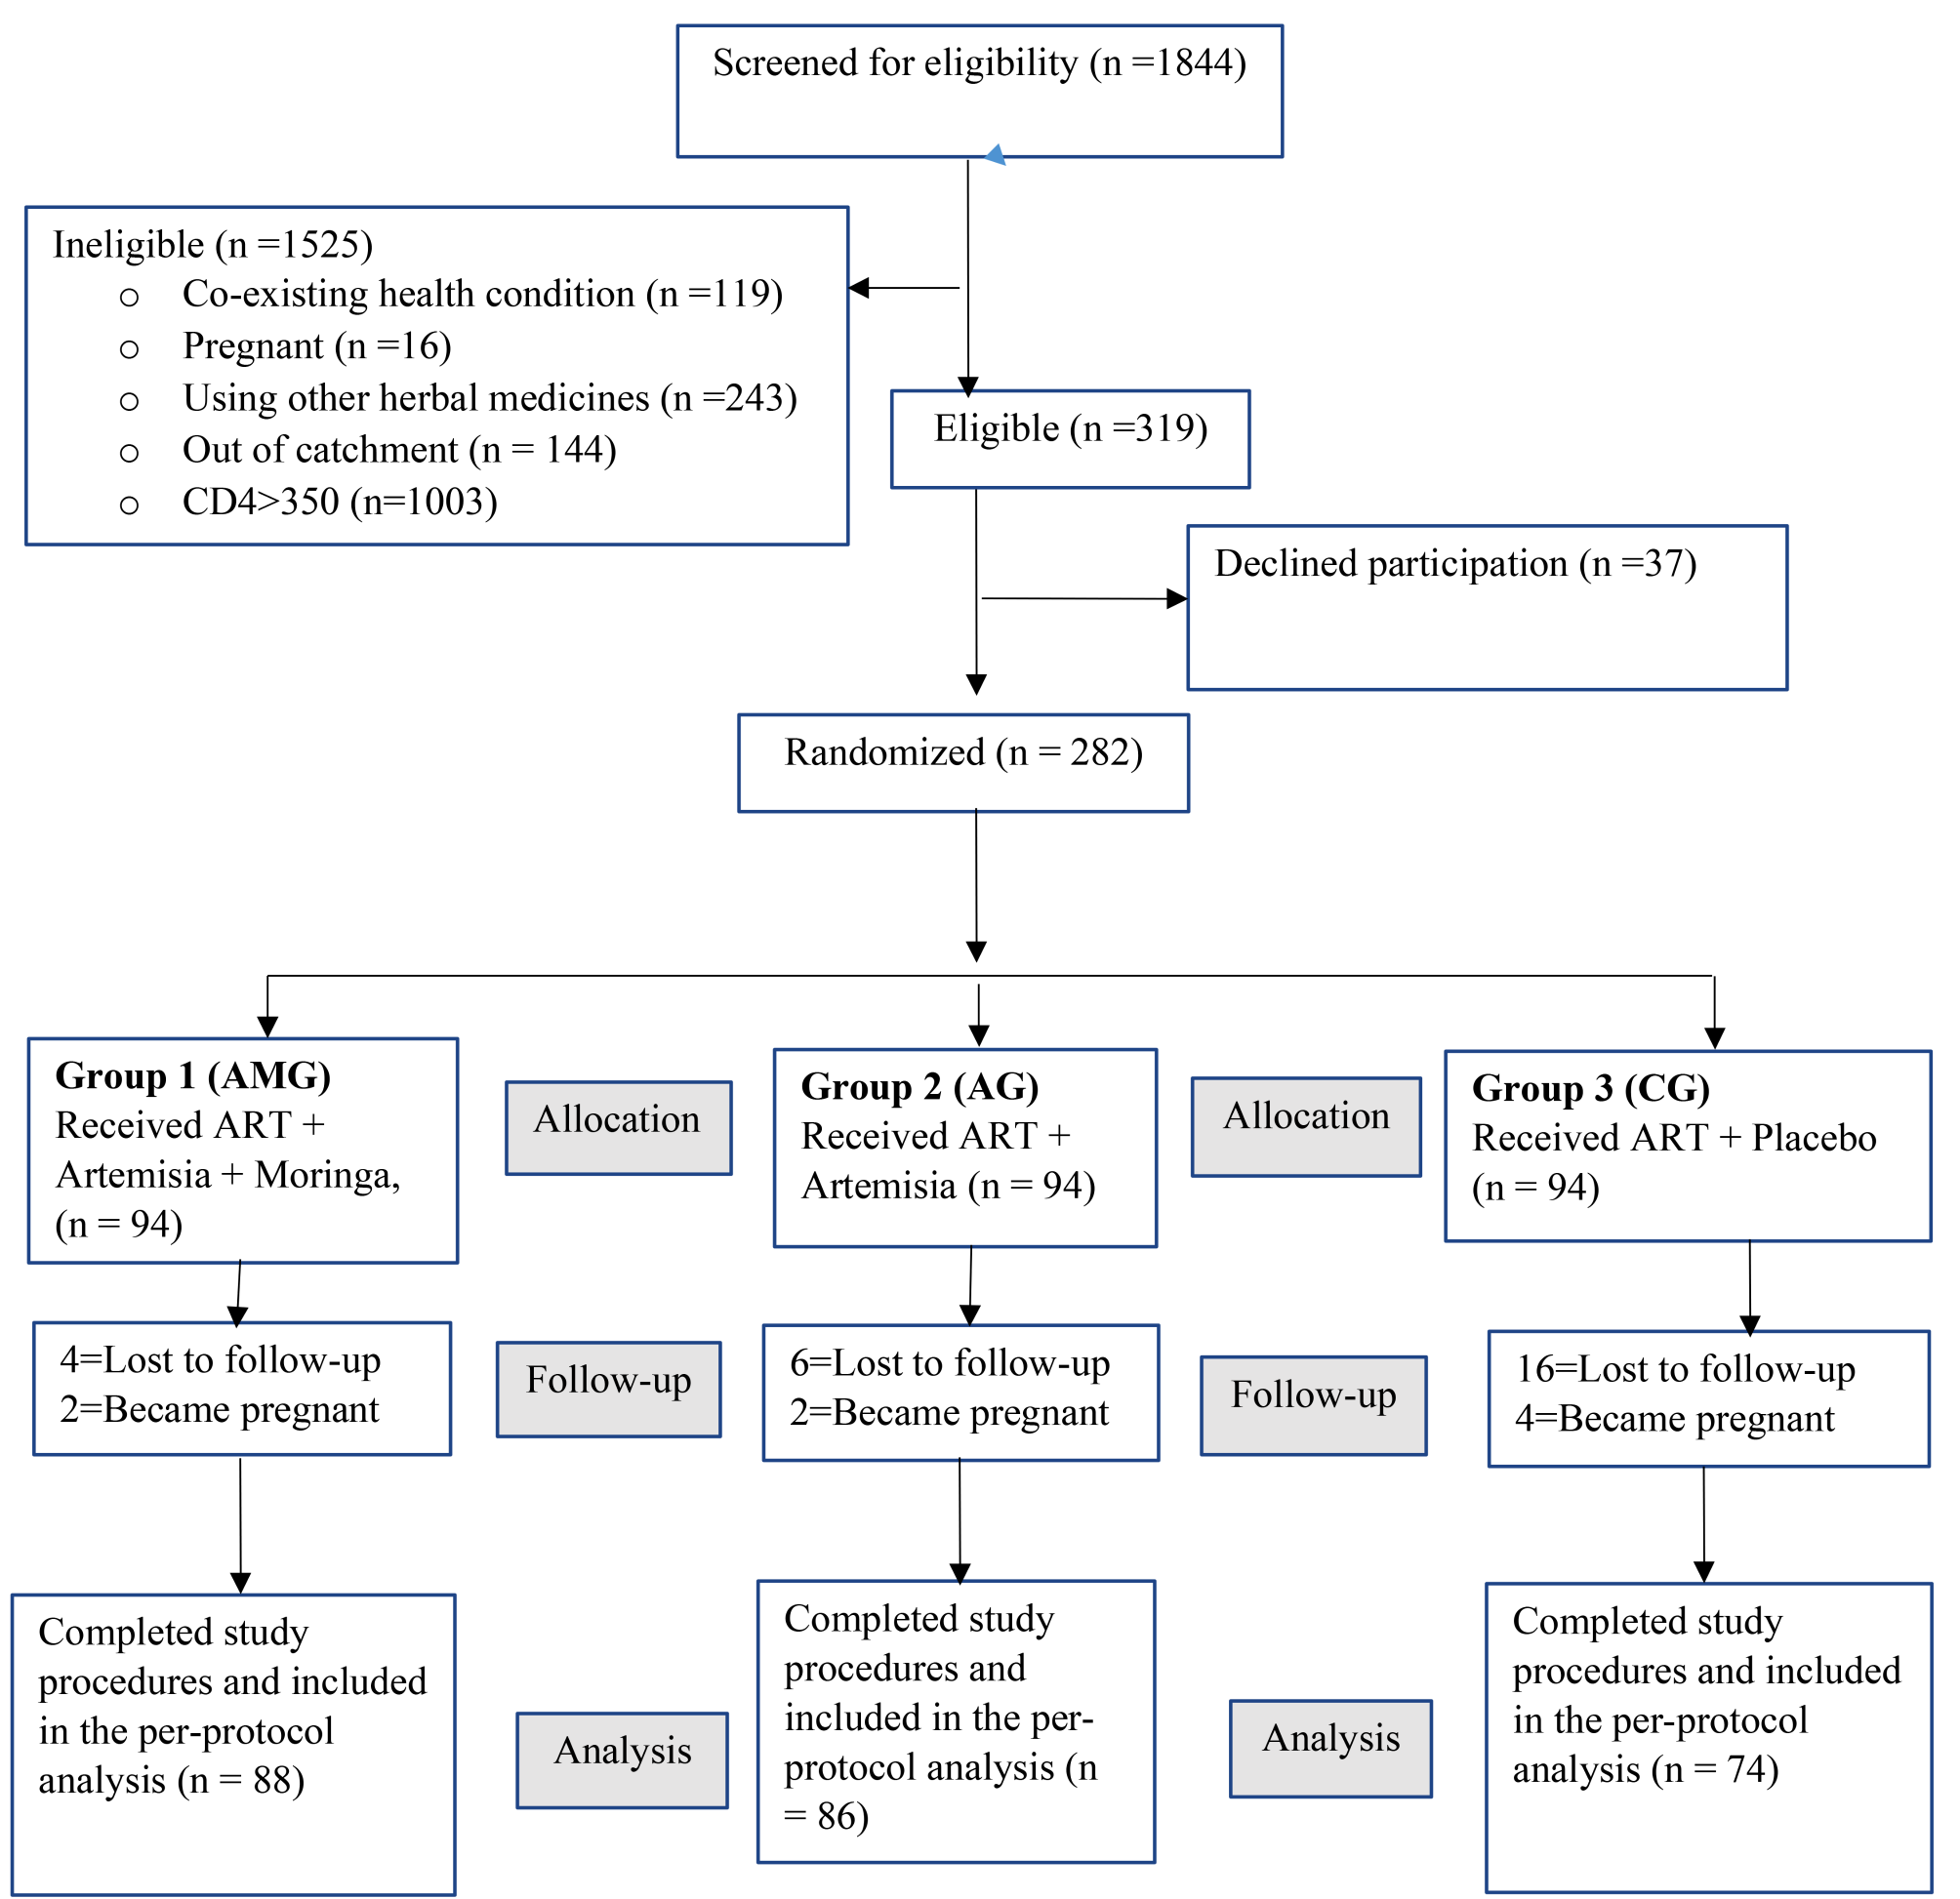 Evaluation of the effects of Artemisia Annua L. and Moringa Oleifera Lam. on CD4 count and viral load among PLWH on ART at Mbarara Regional Referral Hospital: a double-blind randomized controlled clinical trial